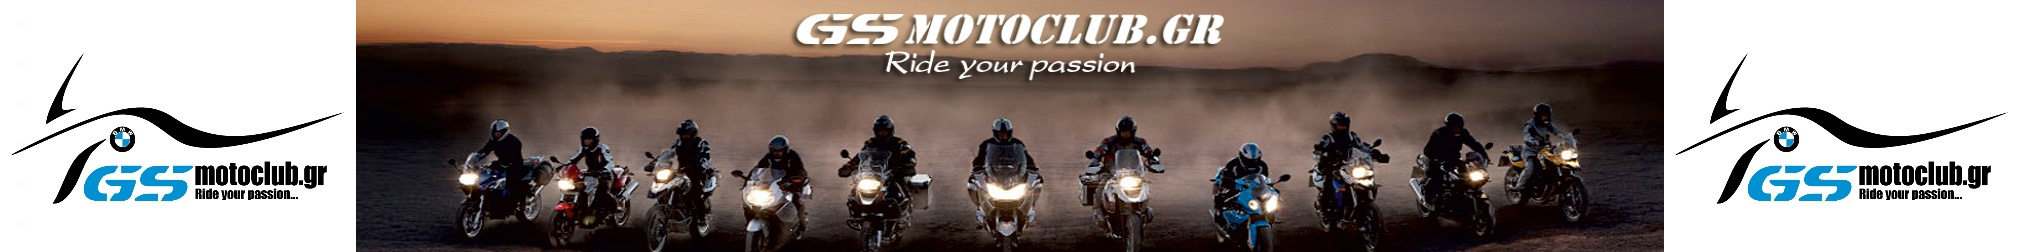 GsMotoclub.gr - Ride your passion...